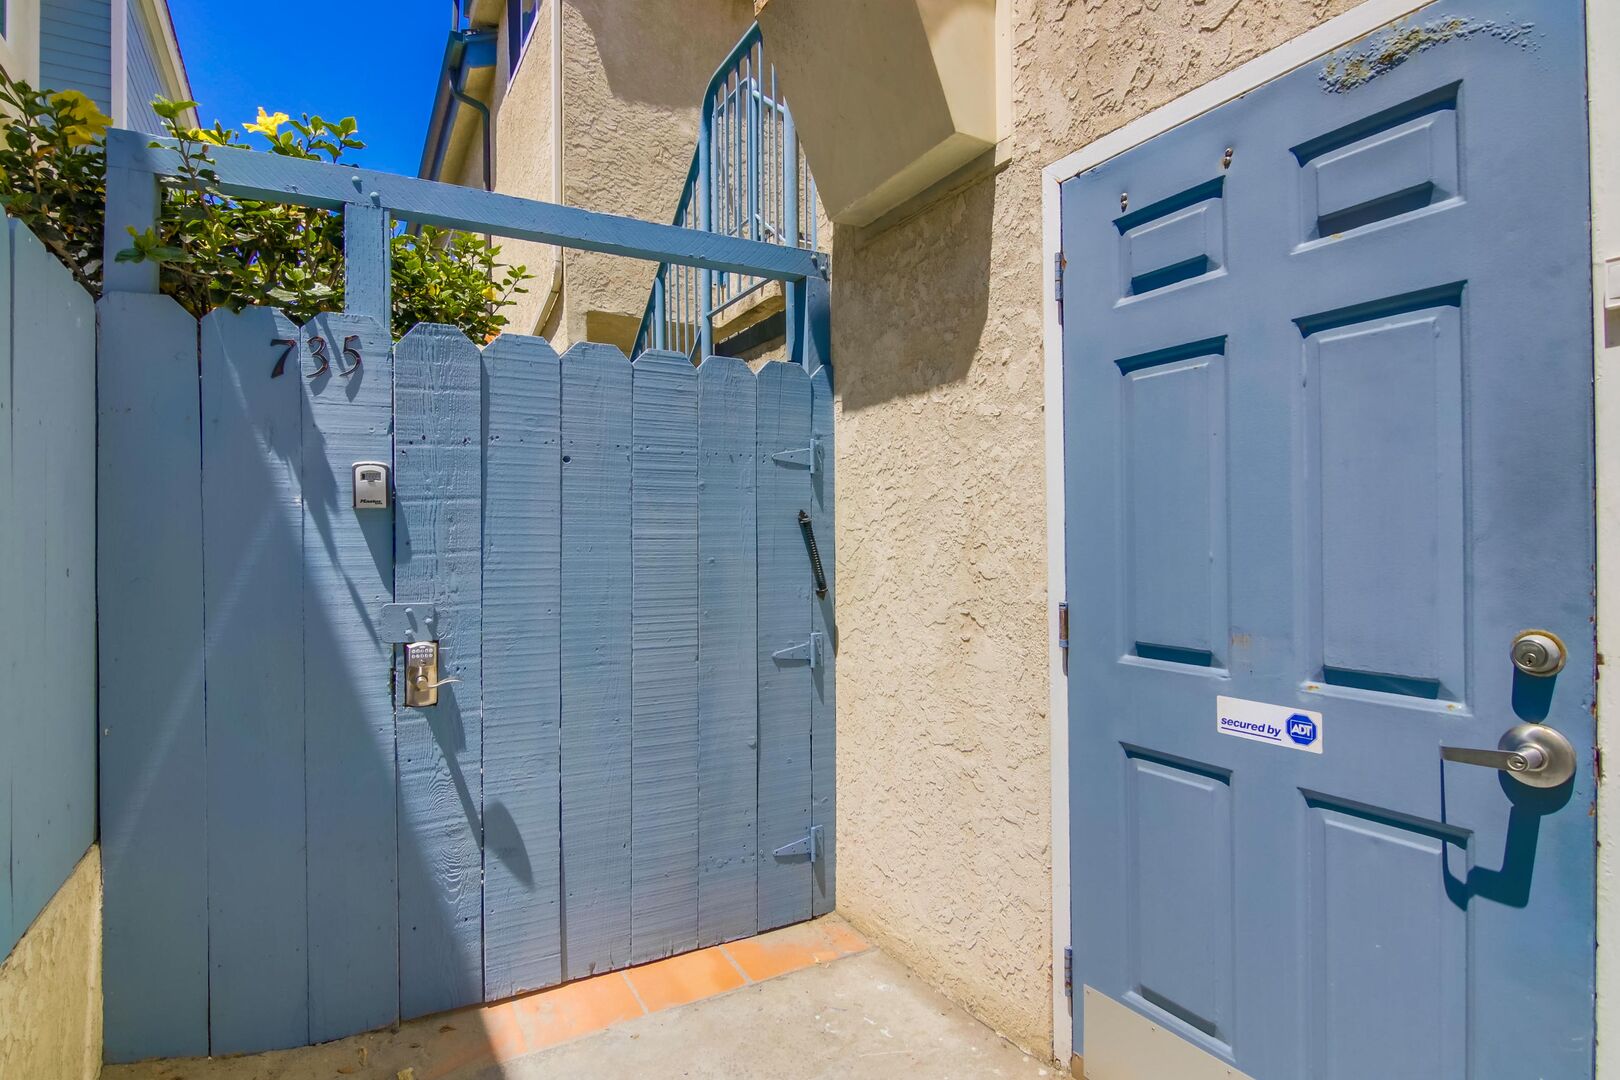 Secure front gate with code access for unit #1 & unit #3